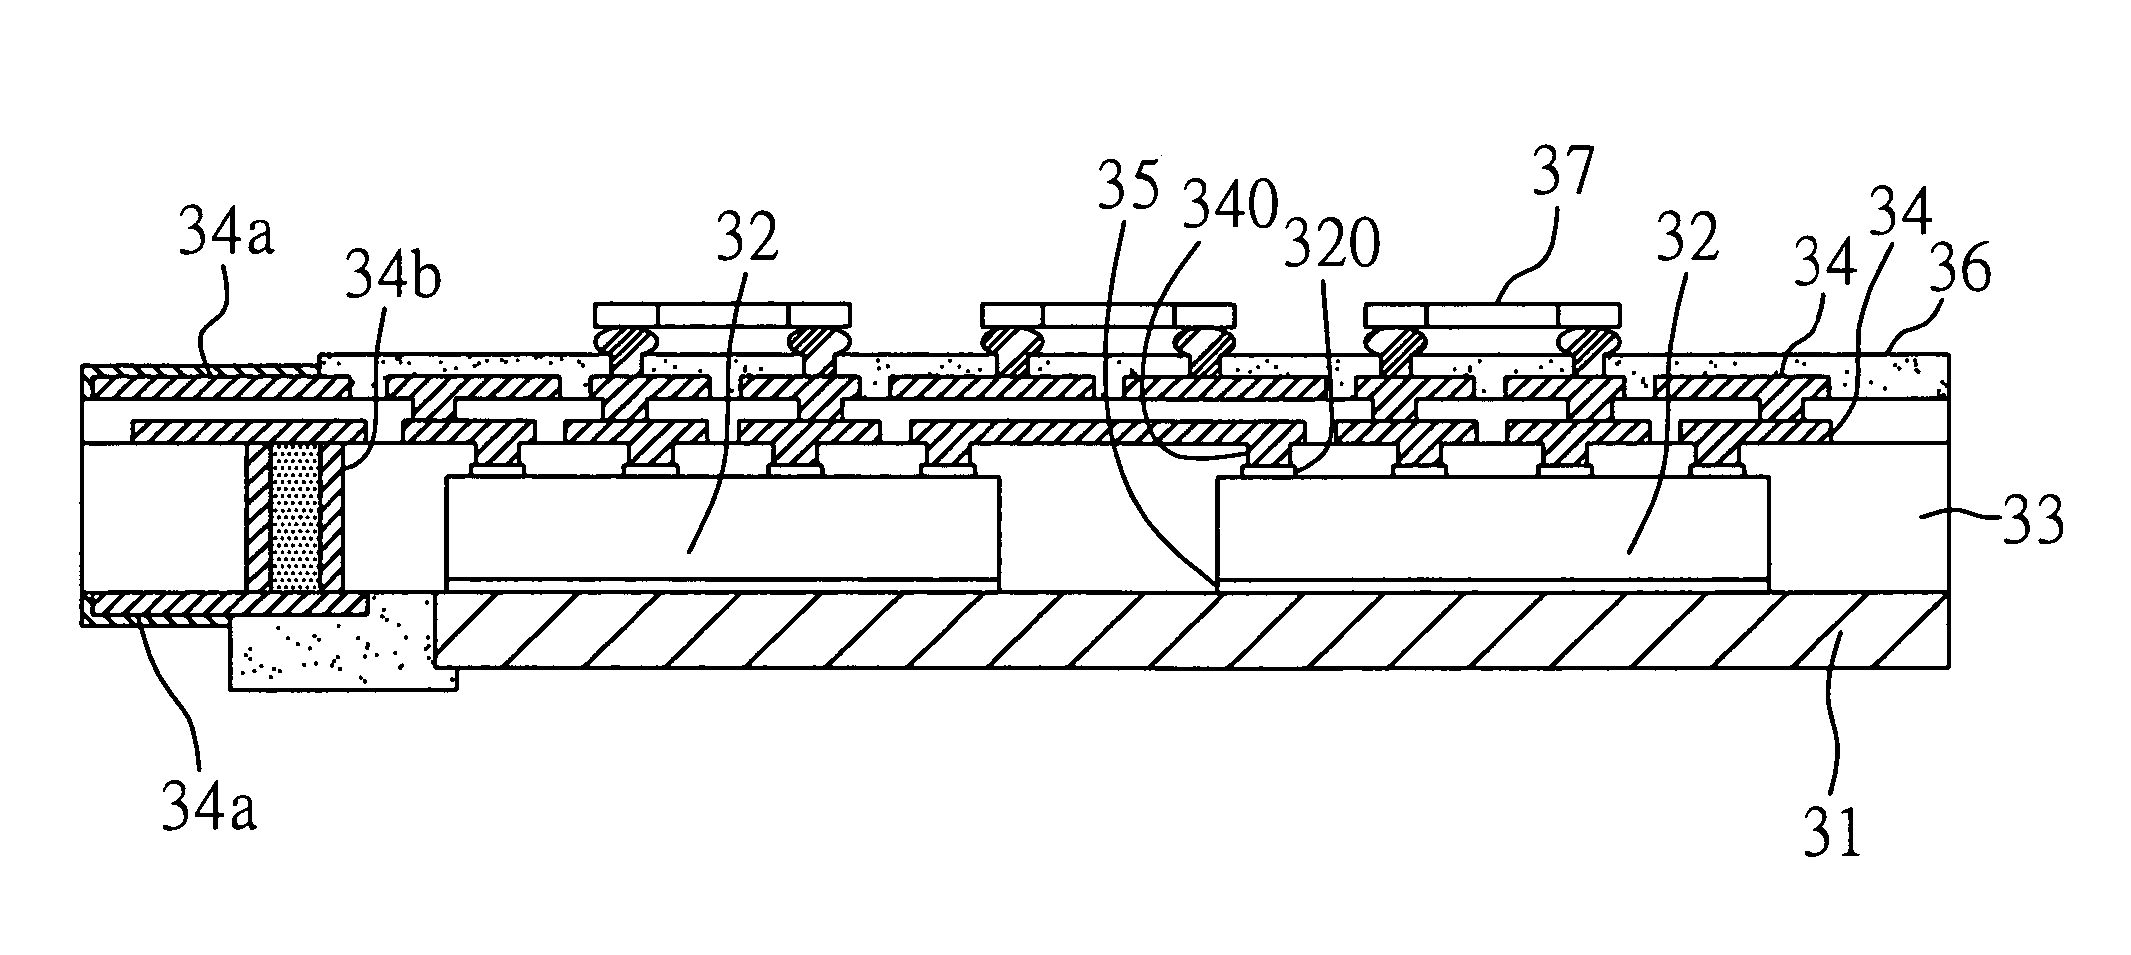 Direct connection multi-chip semiconductor element structure